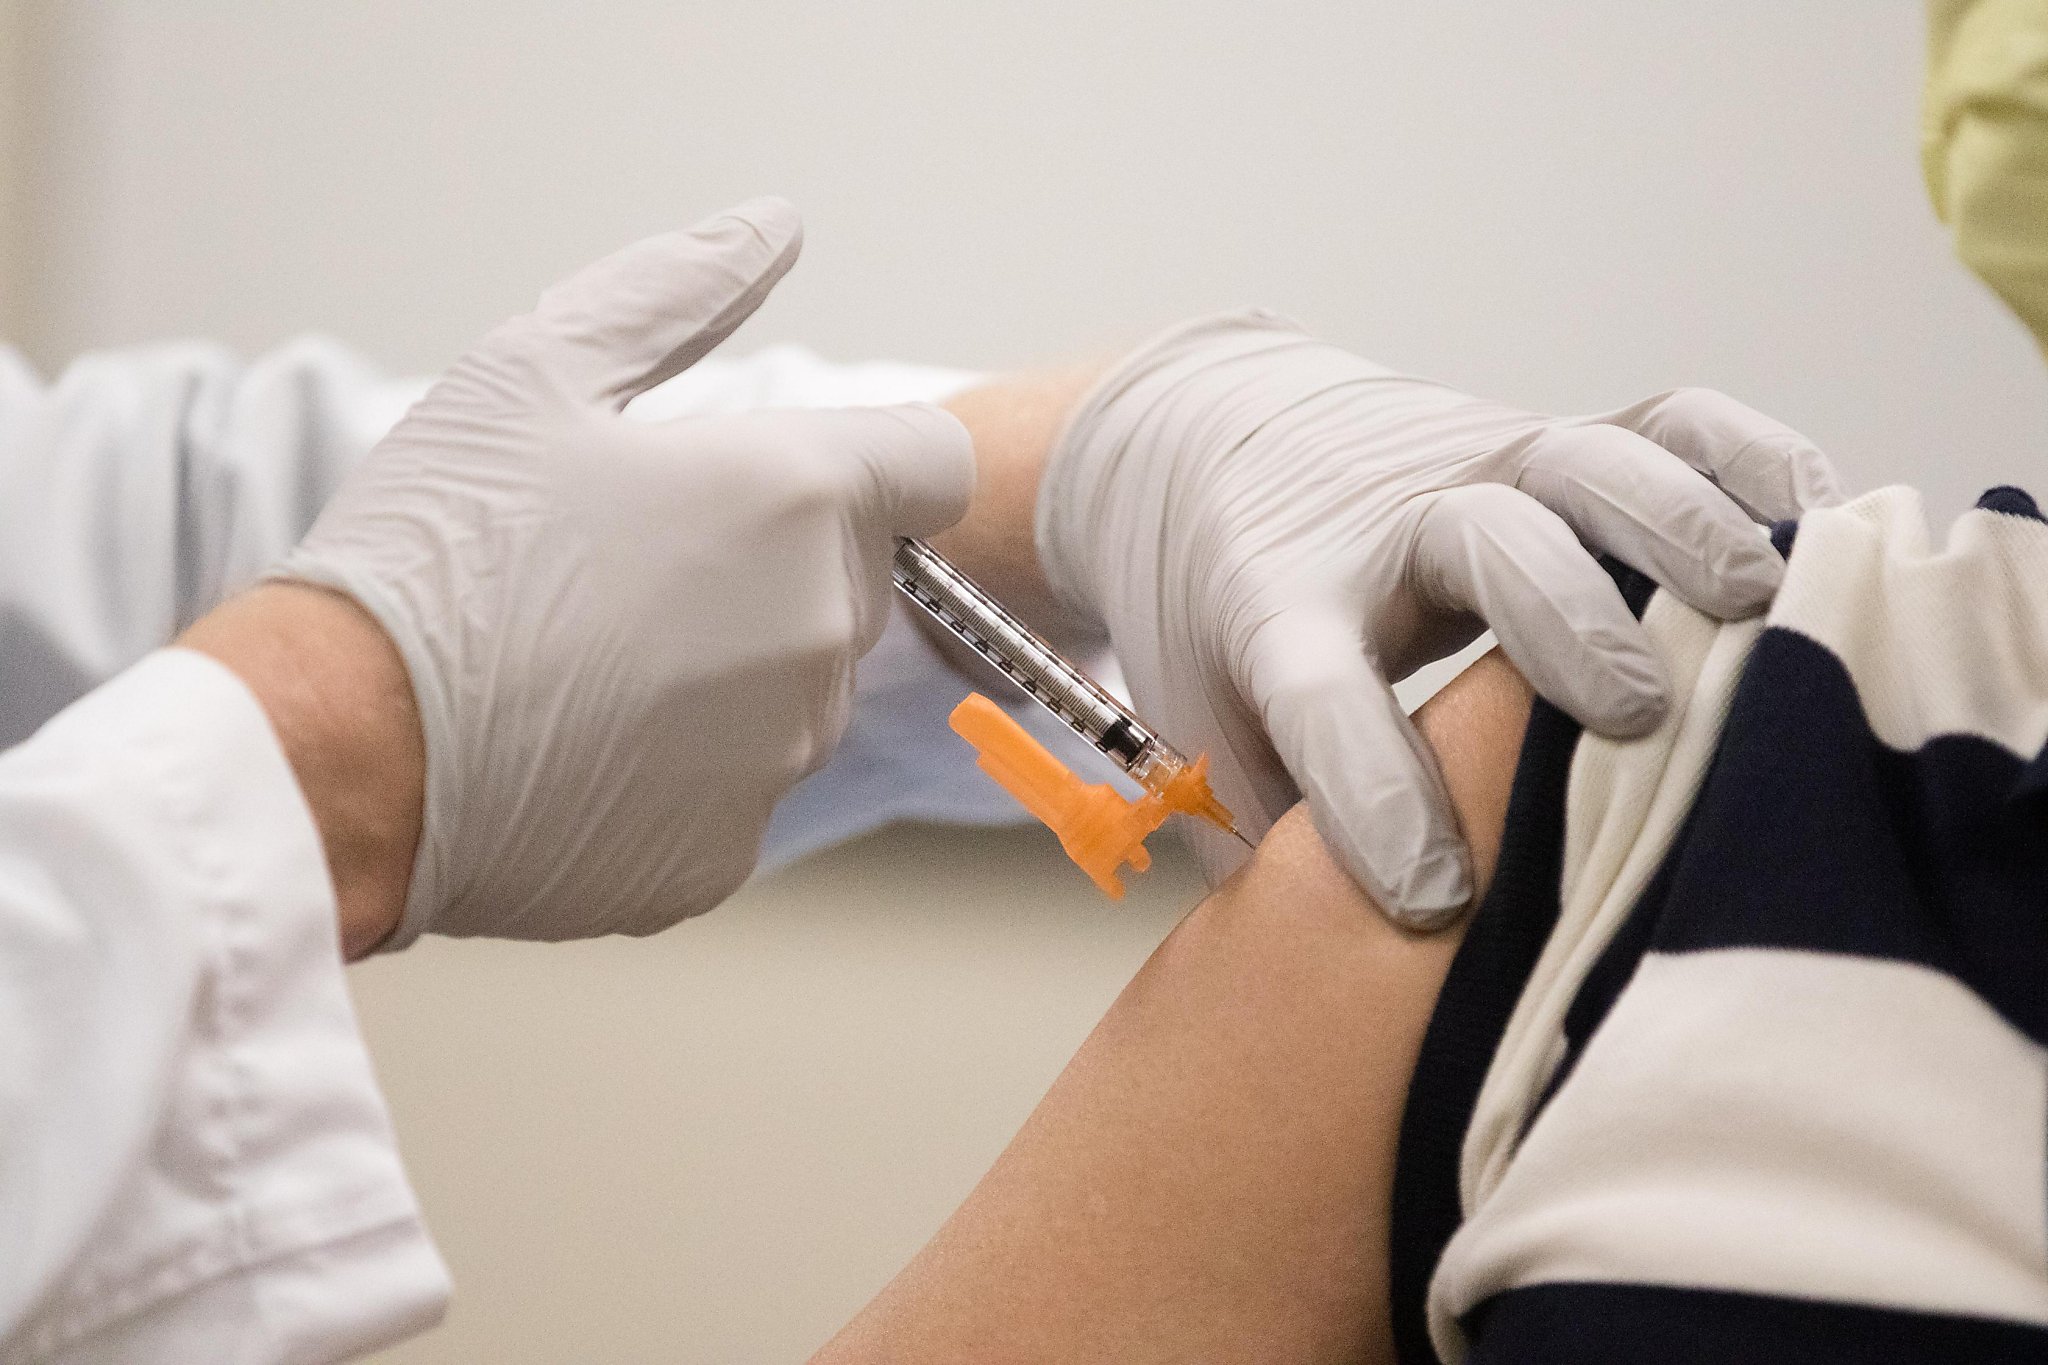 San Francisco launches vaccine notification system